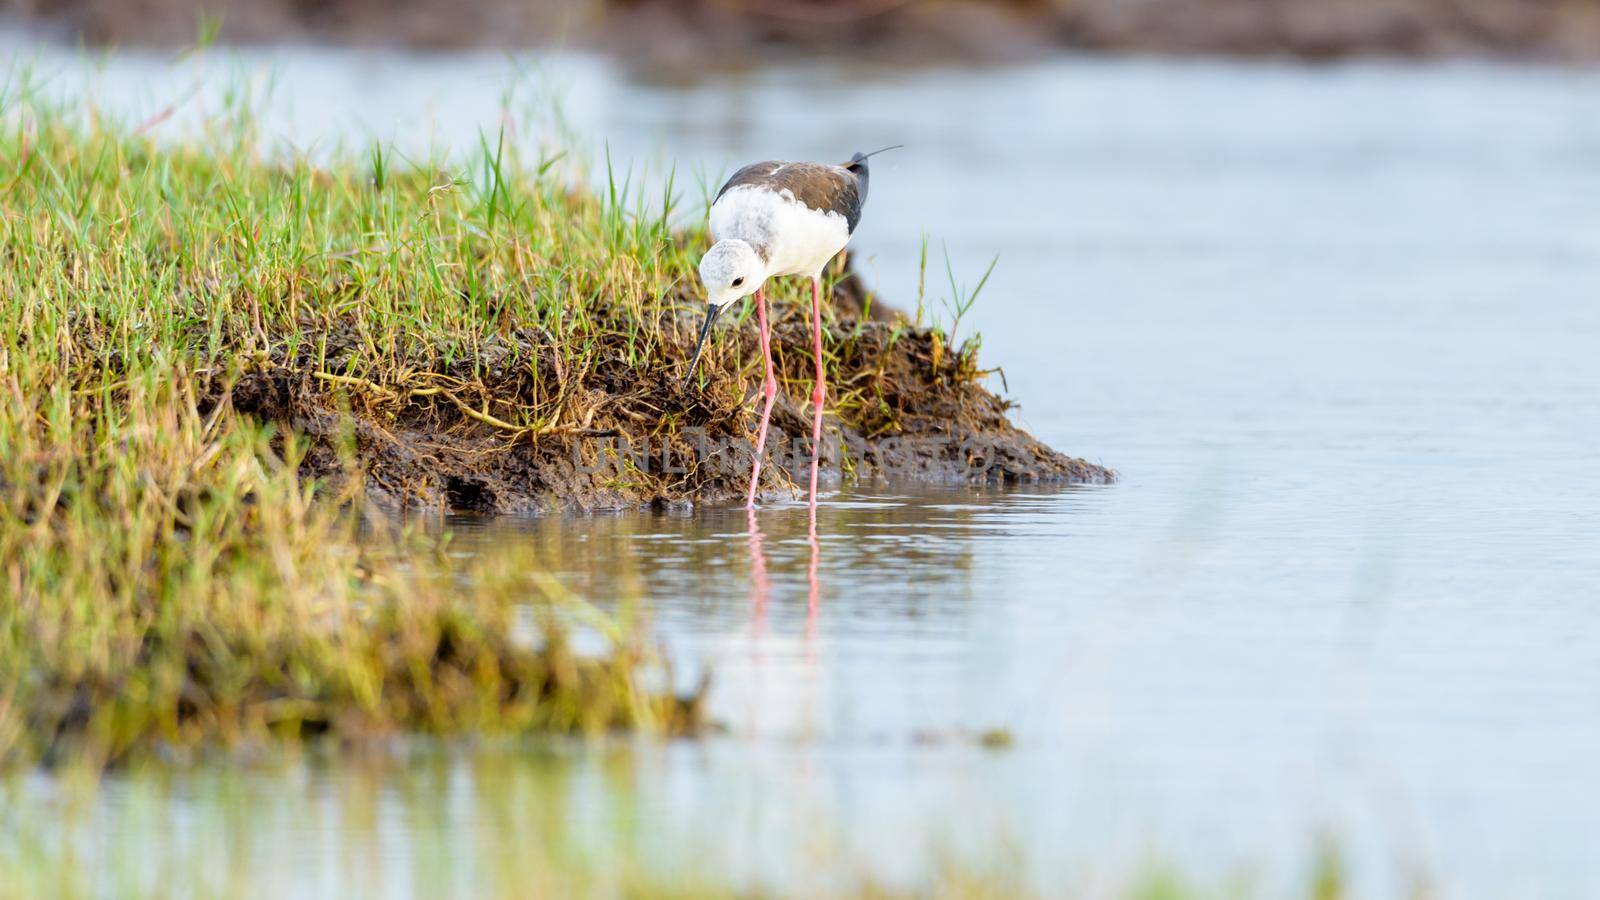 Black-winged stilt or Himantopus himantopus, White bird with black wings and red long legs are walking, looking for fish to feed in the shallow waters by the lake